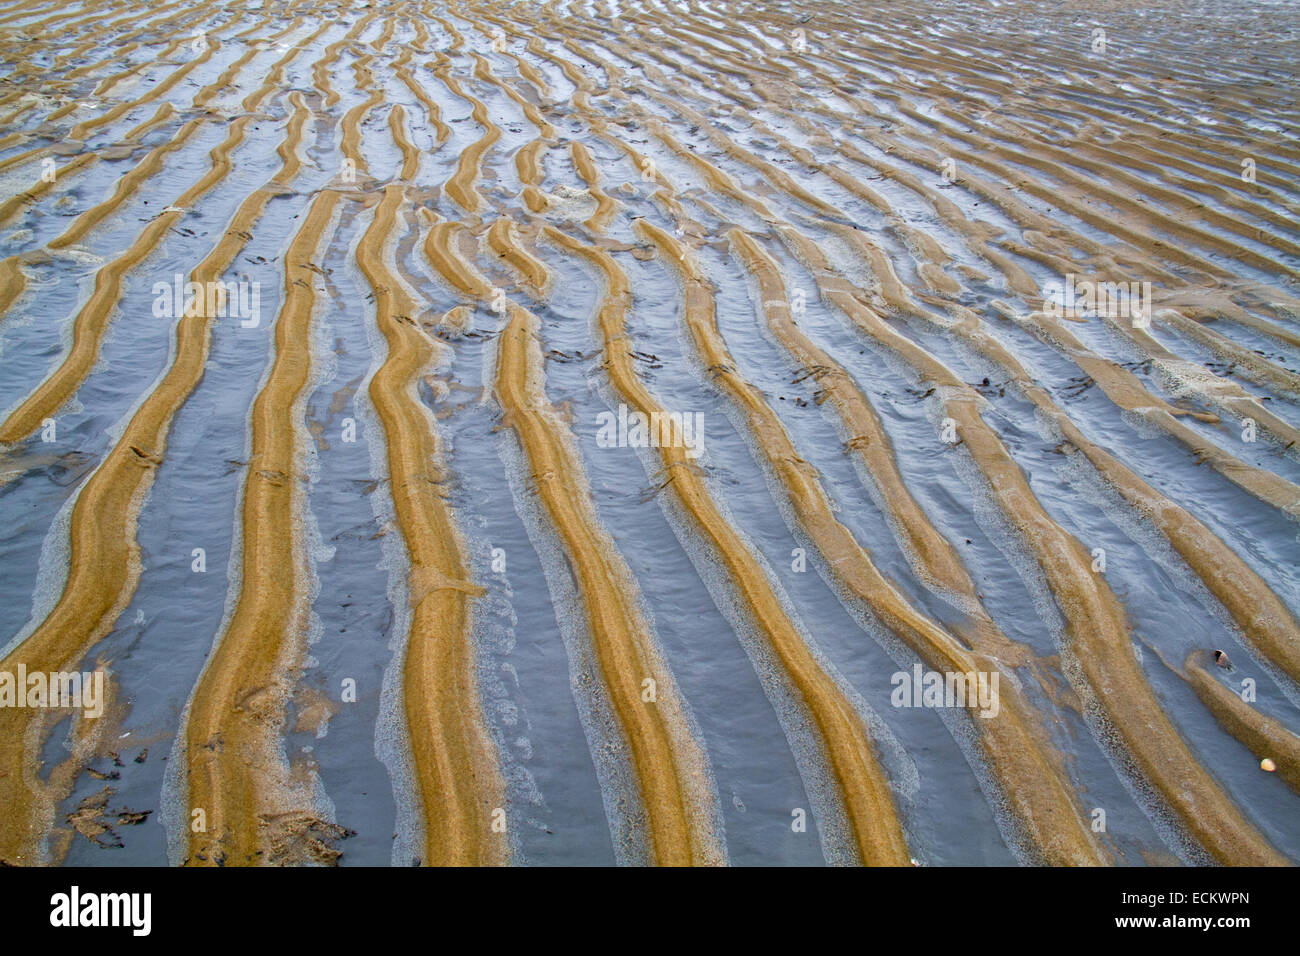 Sedimentation of clay on a pattern of ripples in sand on a beach Stock Photo